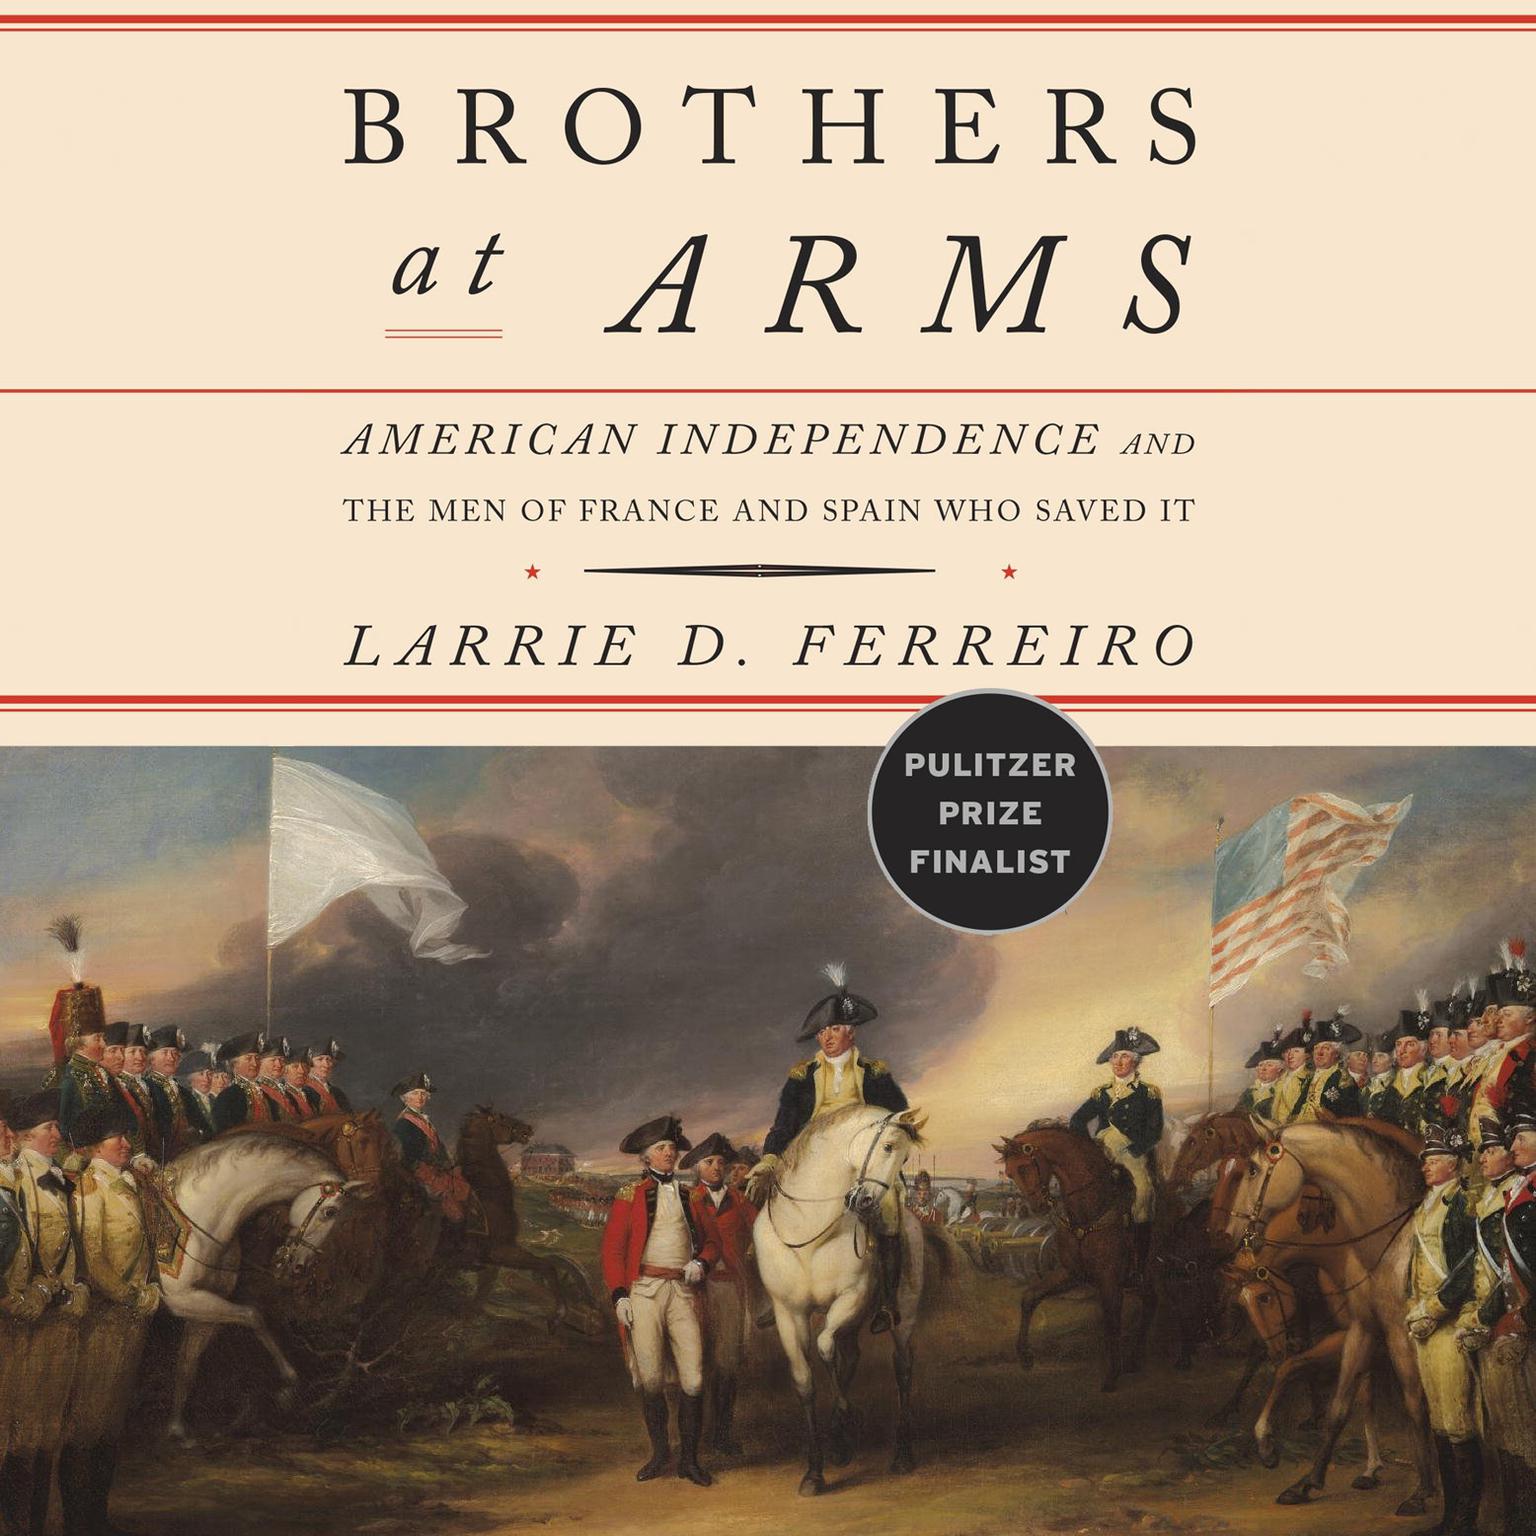 Brothers at Arms: American Independence and the Men of France and Spain Who Saved It Audiobook, by Larrie D. Ferreiro